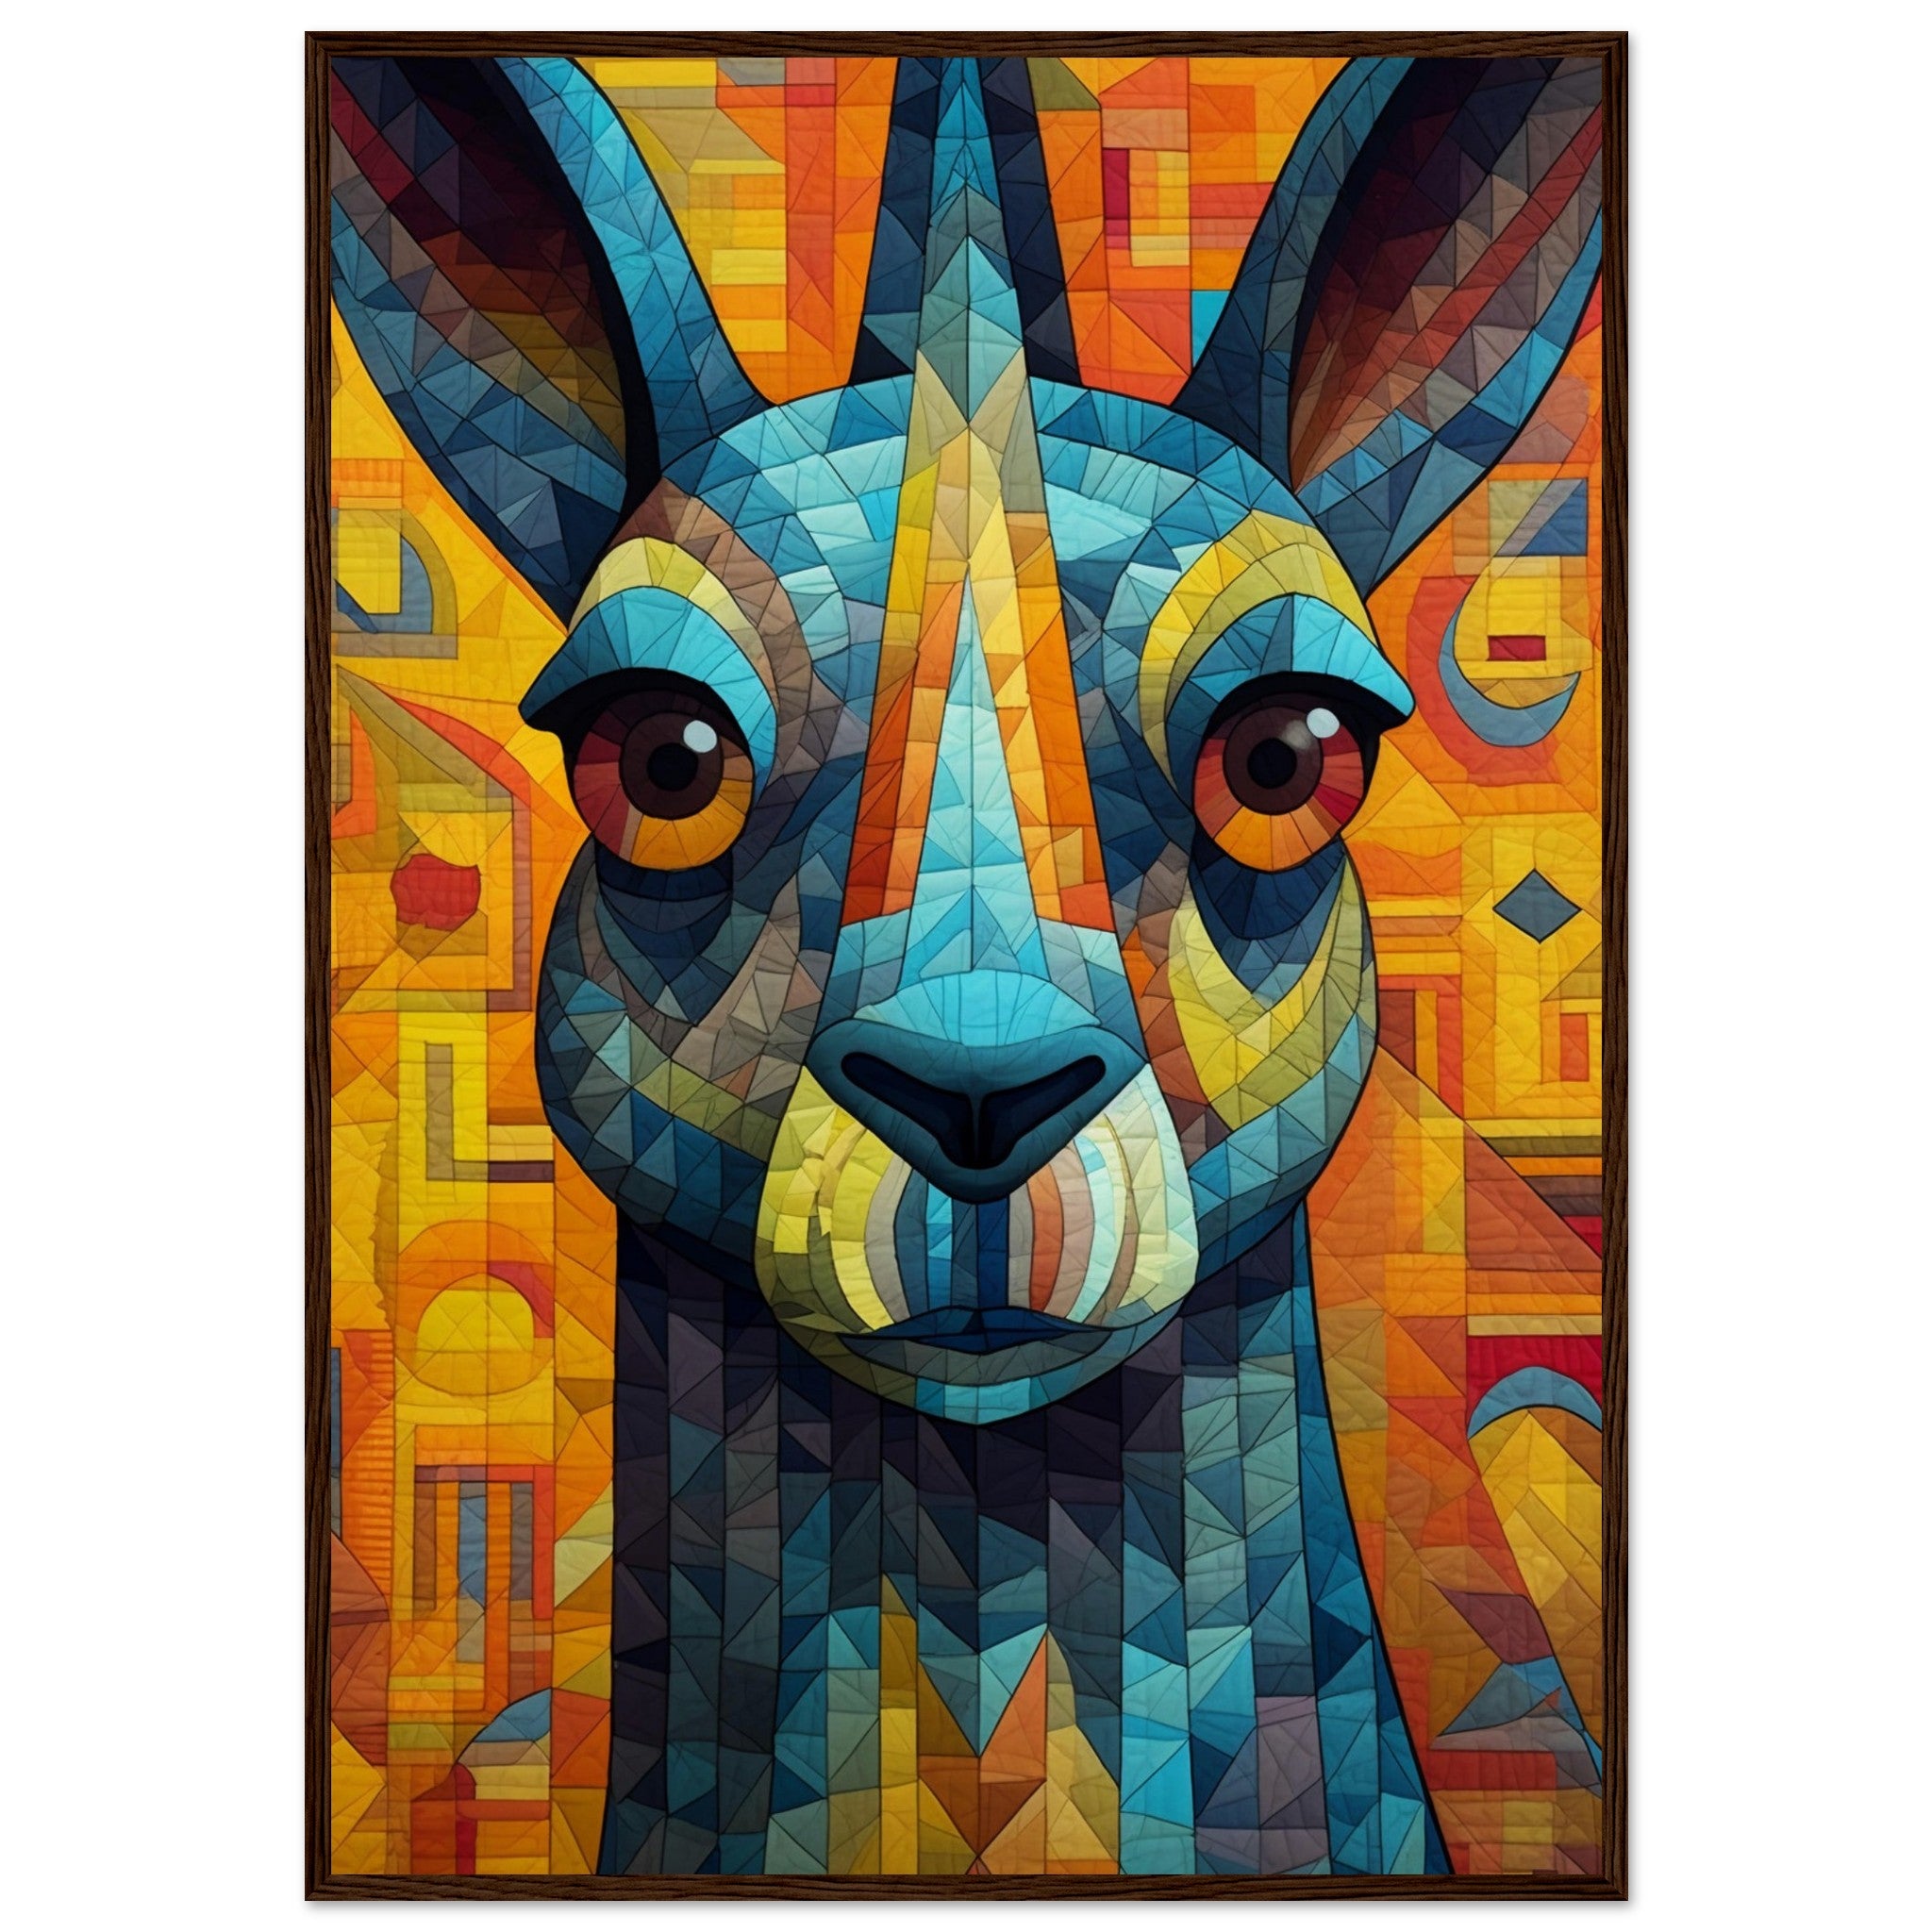 Geometric kangaroo face with neck - immersiarts